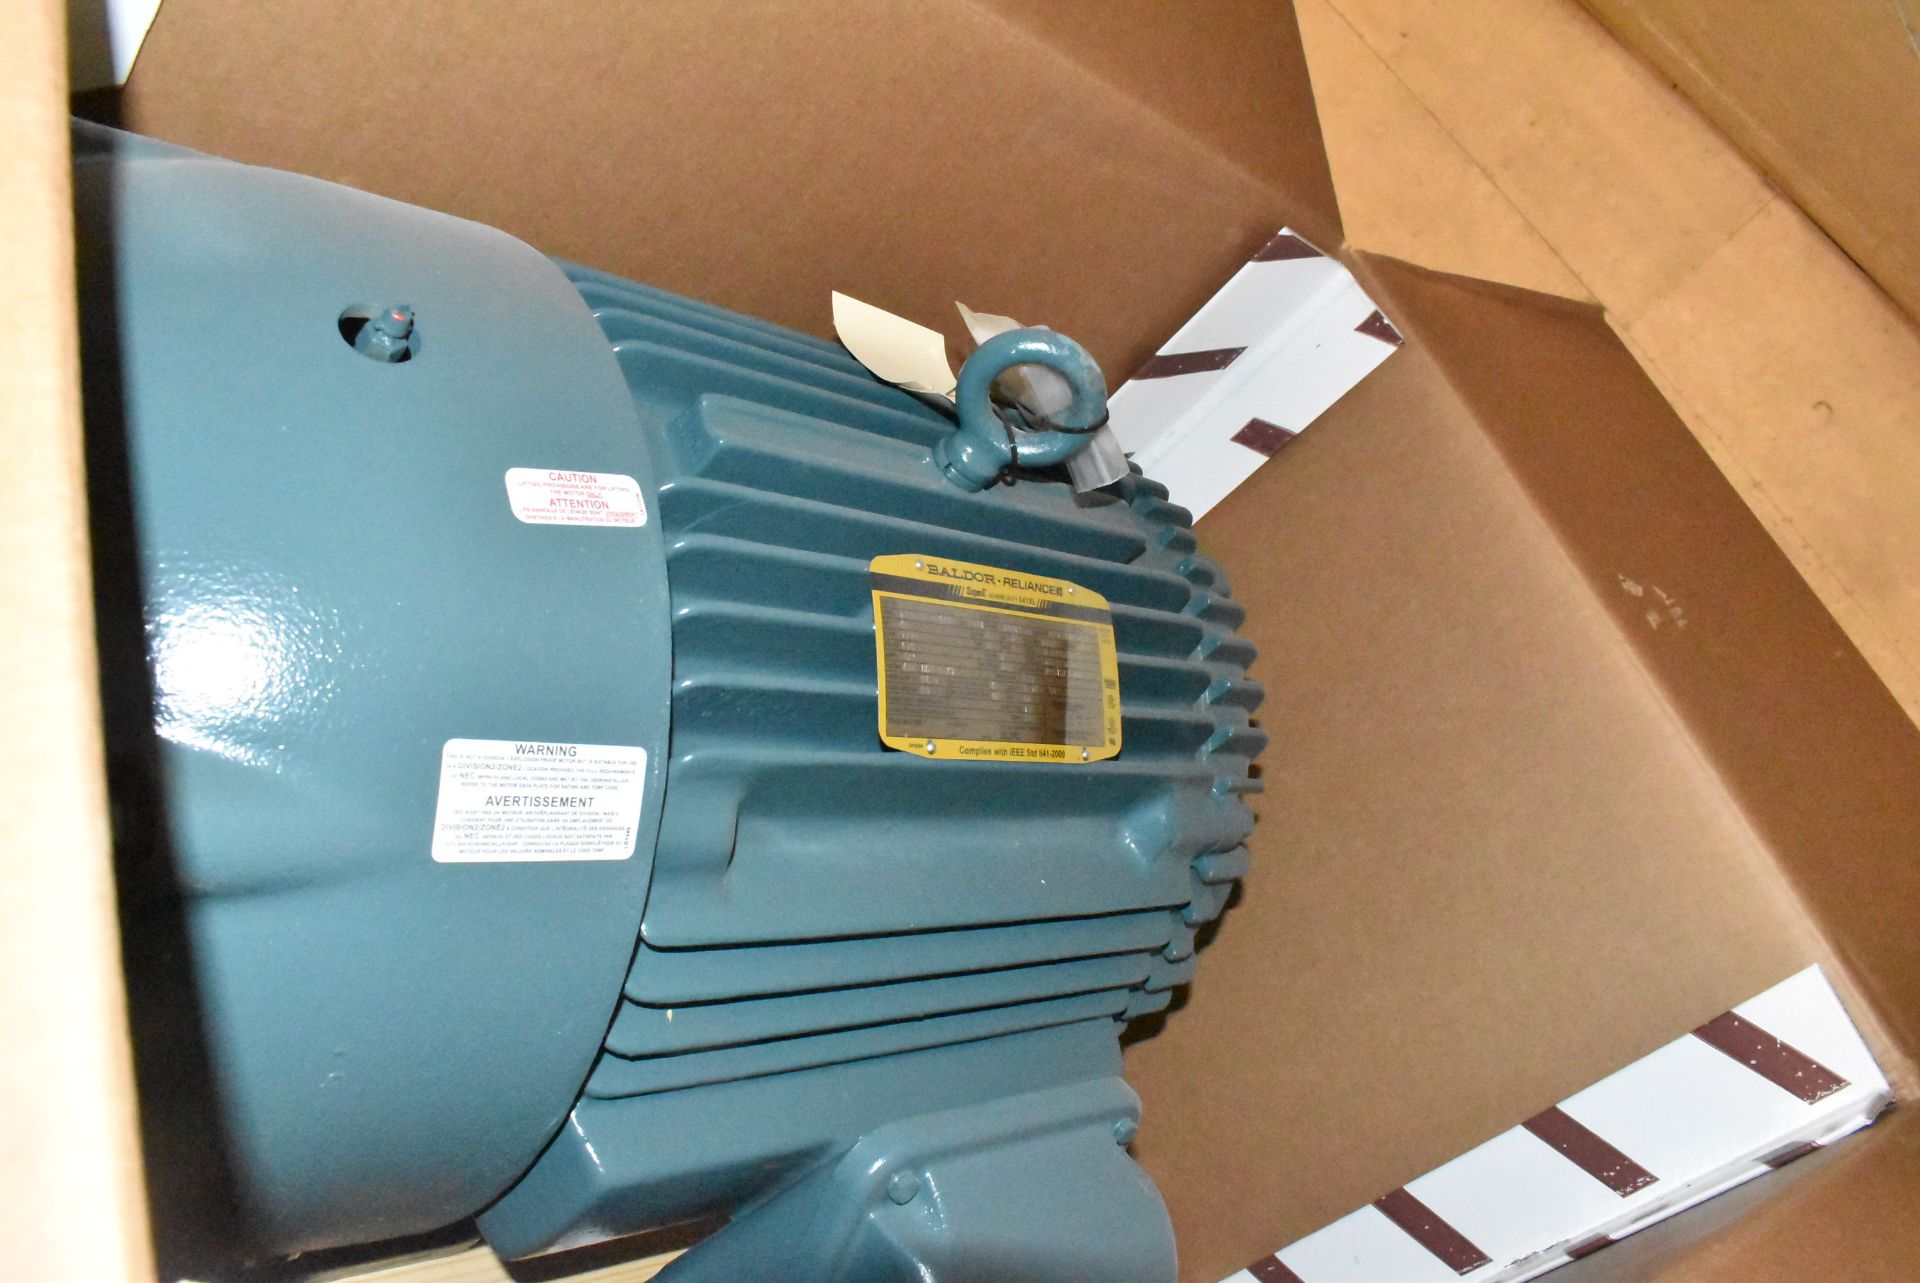 LOT/ CONTENTS OF SHELF CONSISTING OF BALDOR 40HP ELECTRIC MOTOR WITH 1770RPM,575V, 60Hz,3PH 37AMP ( - Image 3 of 5